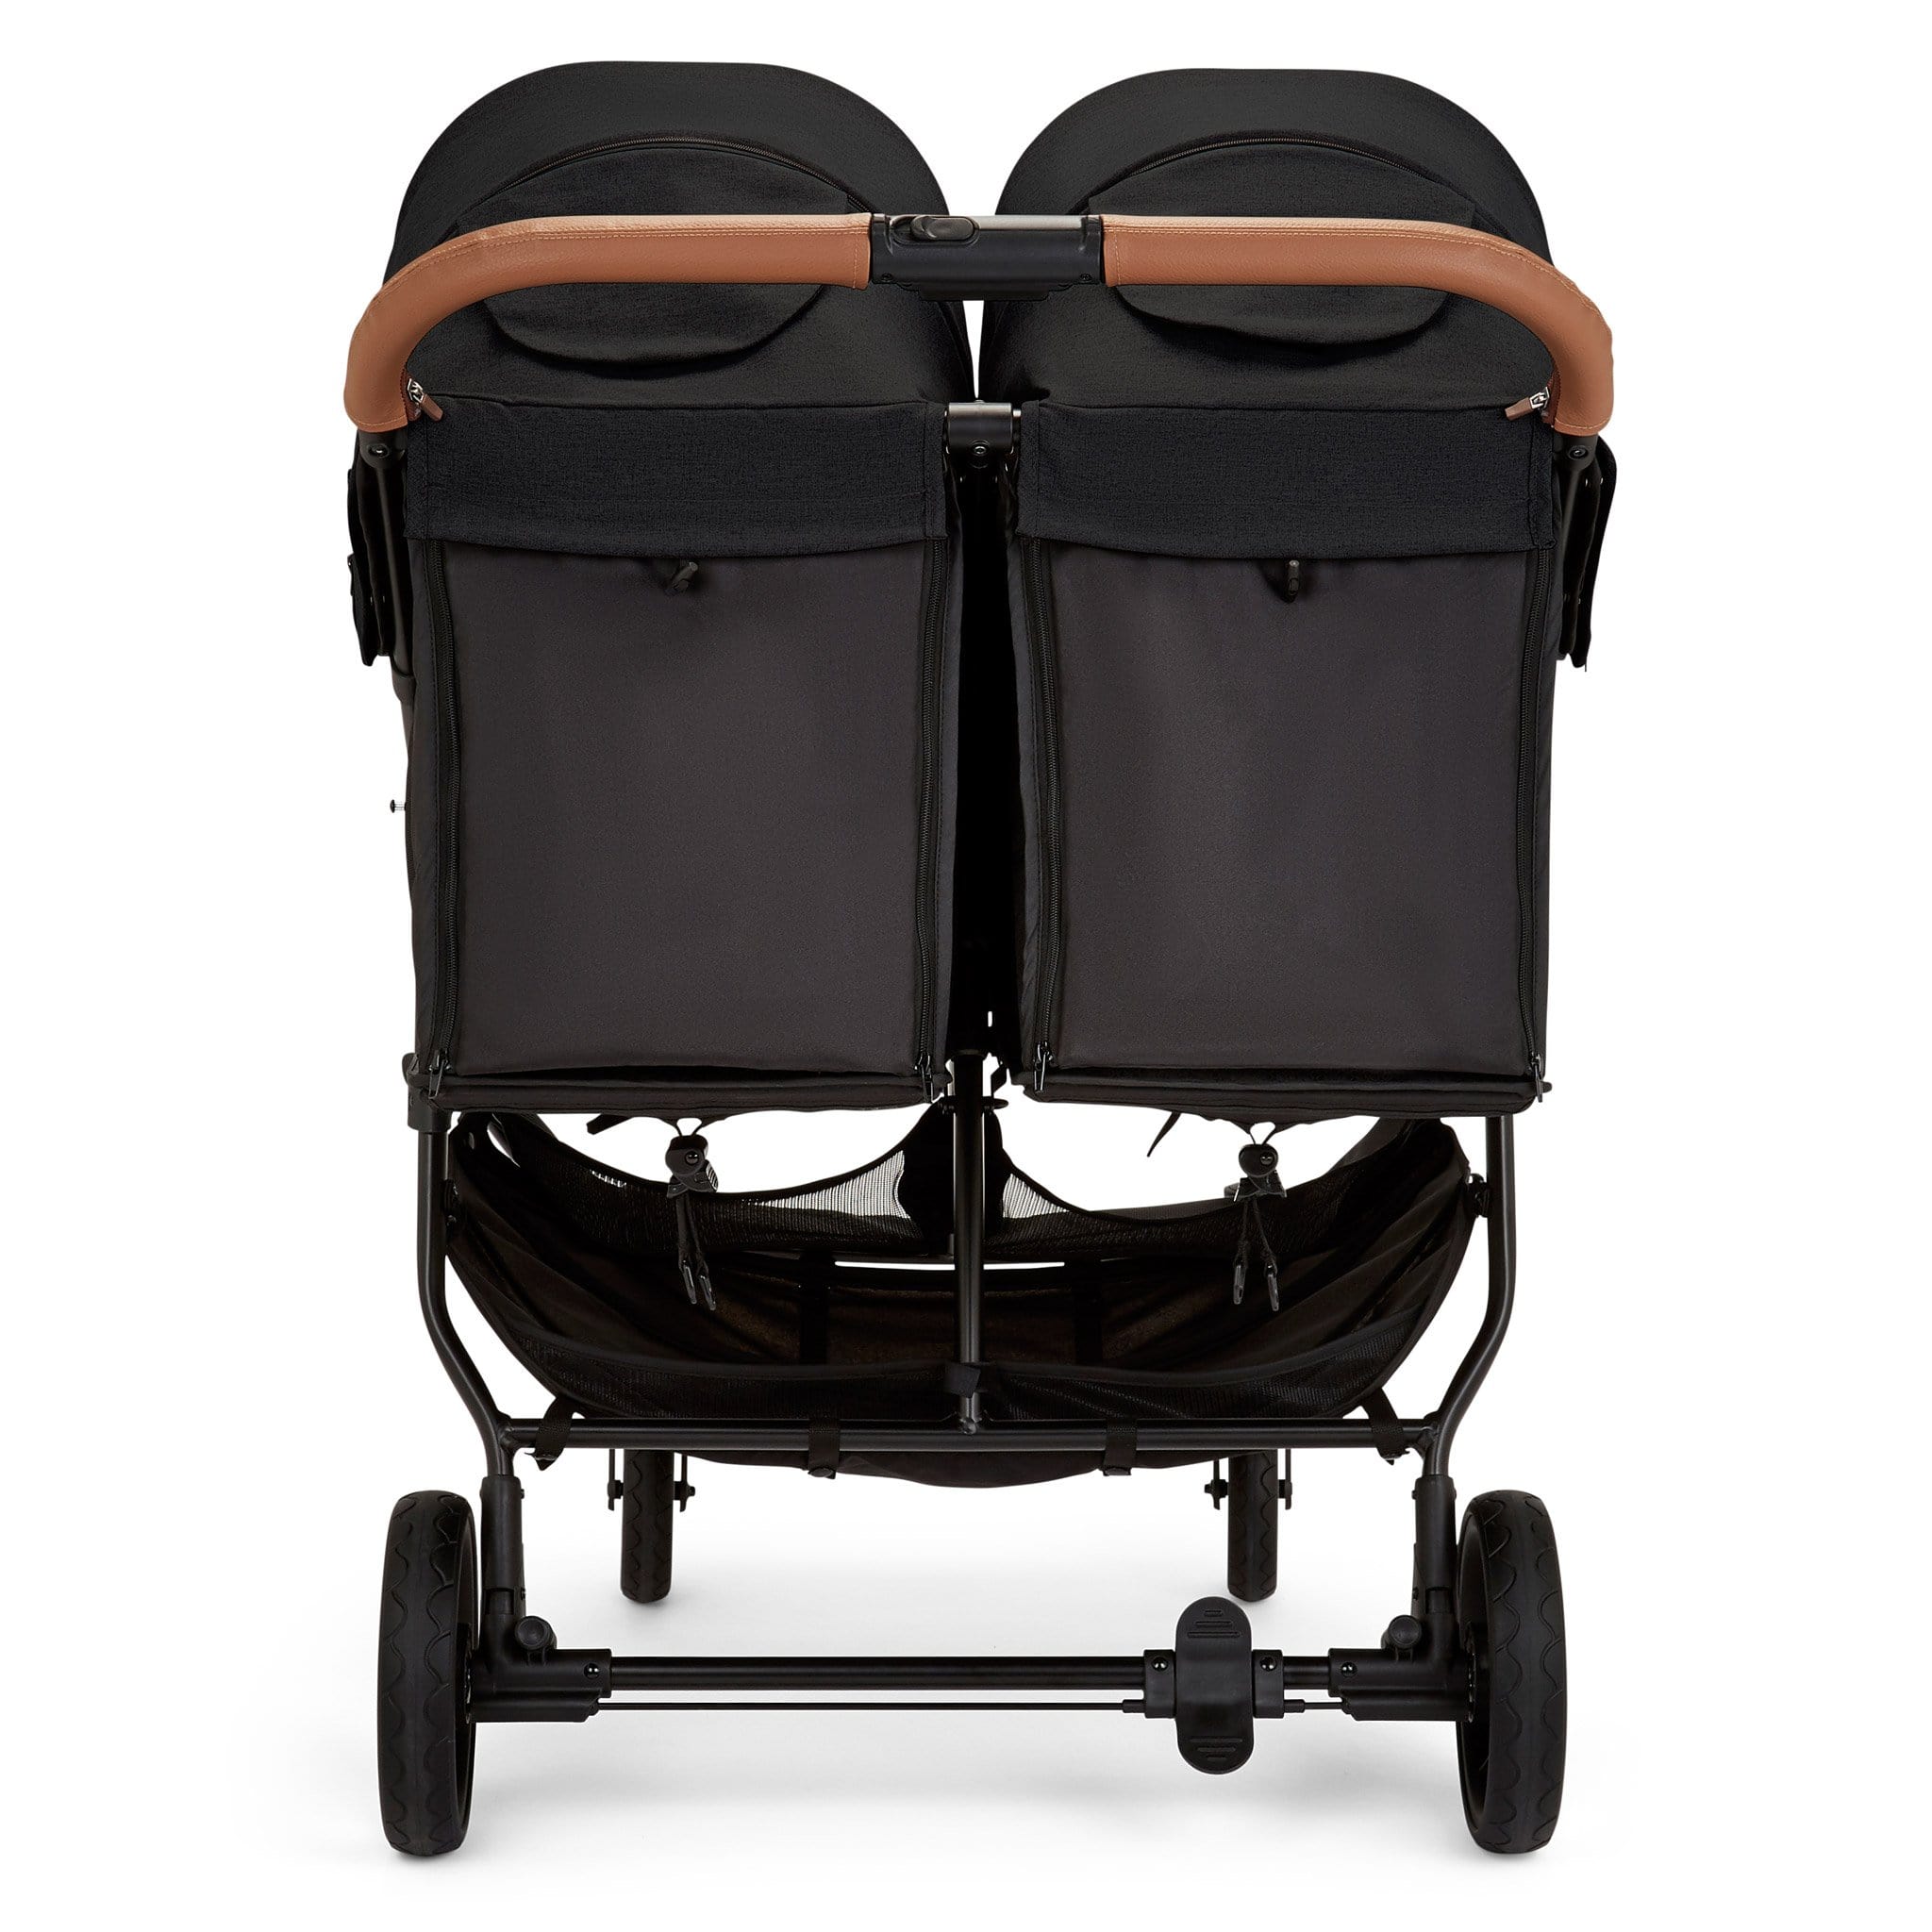 Ickle Bubba double buggies Ickle Bubba Venus Double Stroller Black/Black/Tan 16-004-100-003